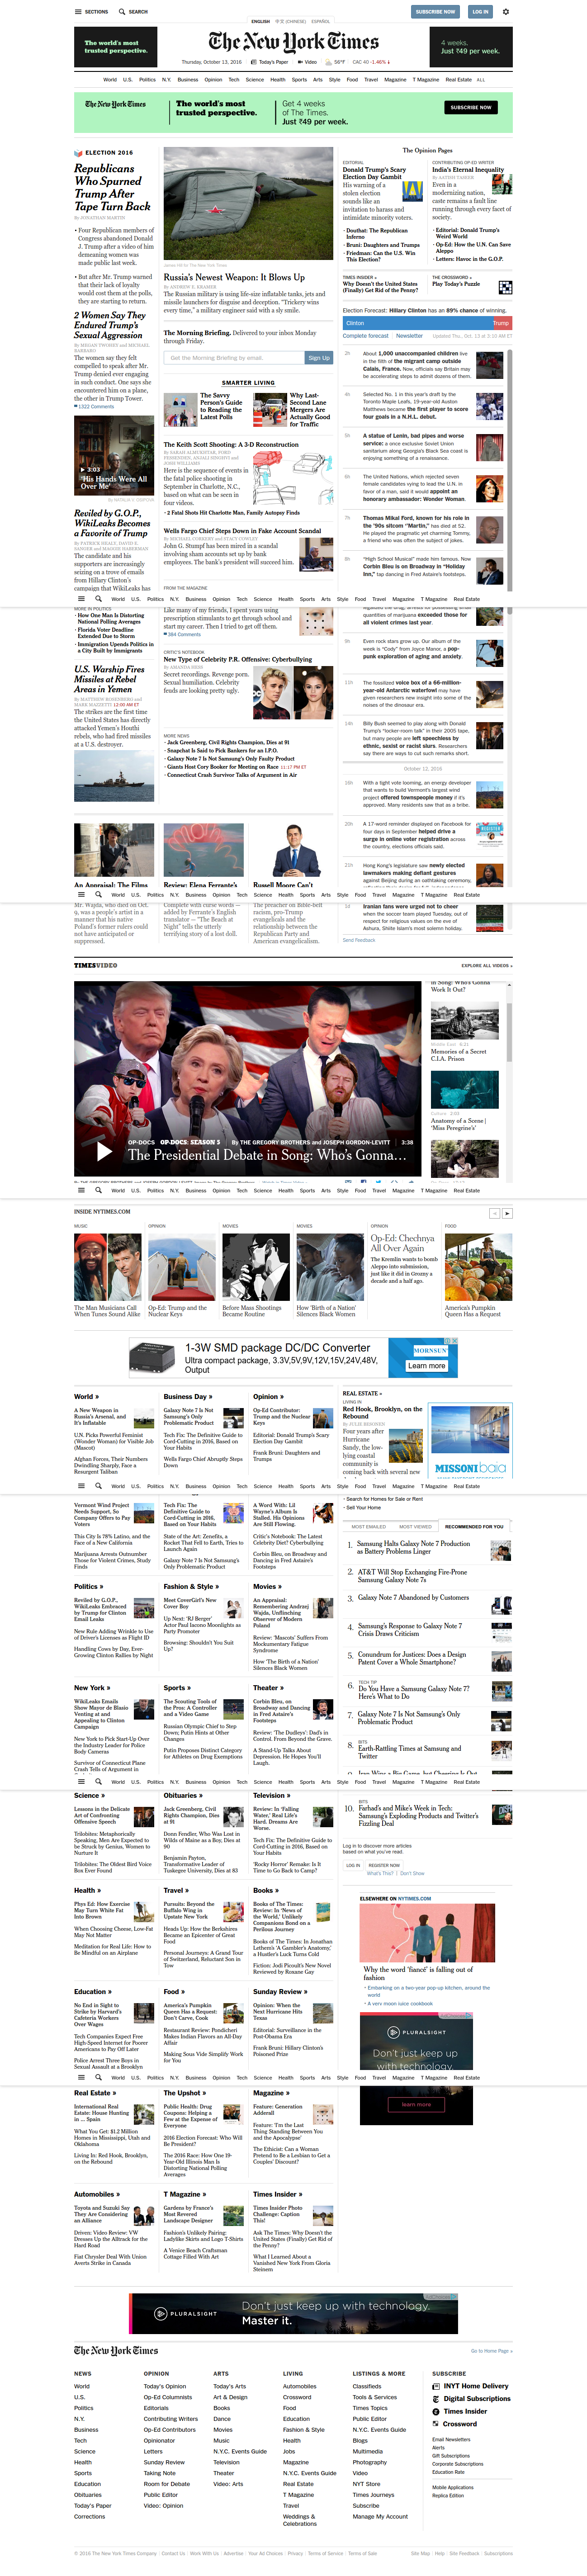 Screenshot of The New York Times' landing page